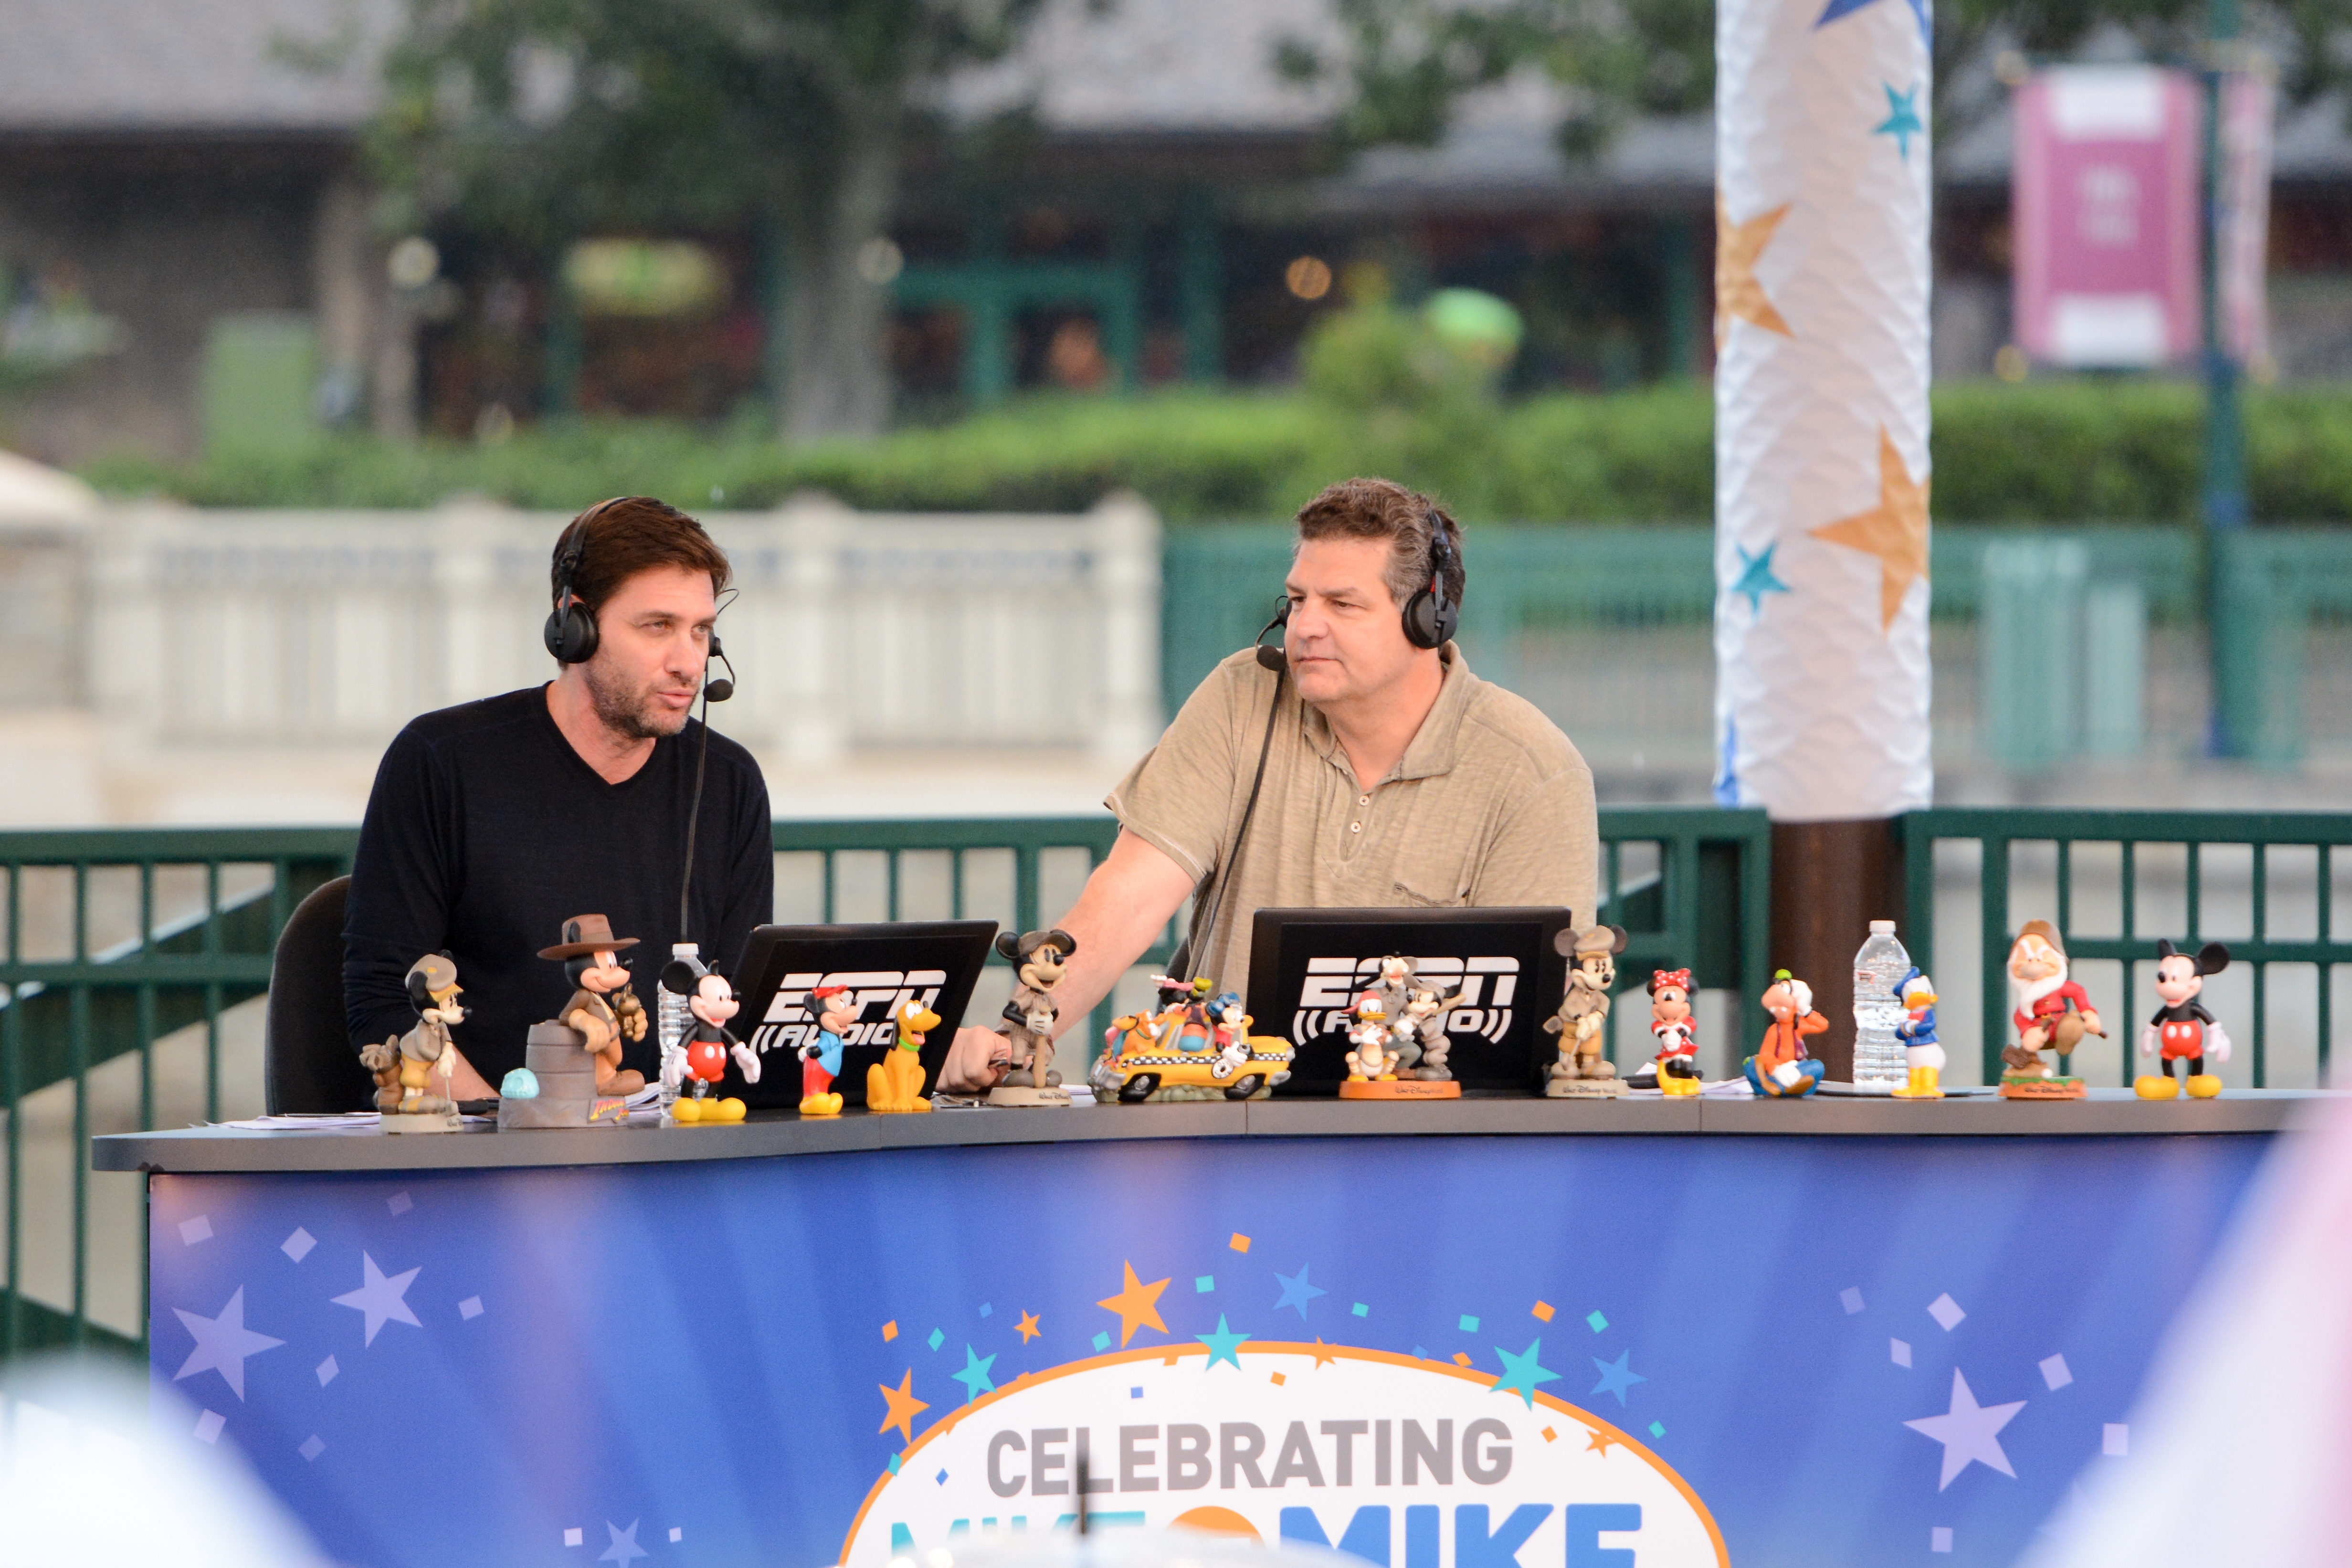 Mike Greenberg (left) and Mike Golic (right) during the Mike & Mike 15th Anniversary show at Disney. (Photo by Heather Harvey / ESPN Images)